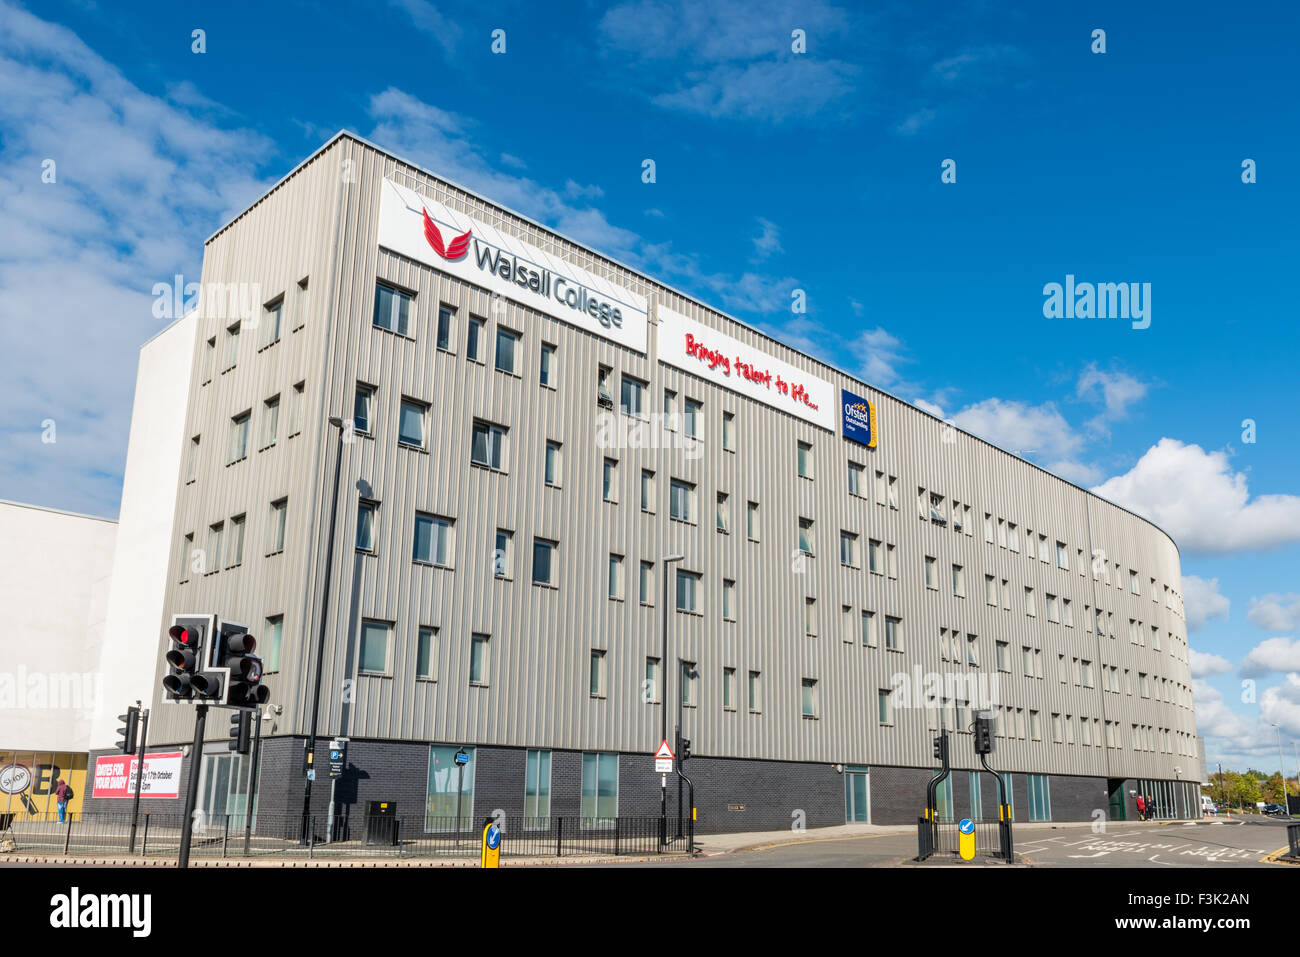 Walsall College in Walsall West Midlands UK Stockfoto